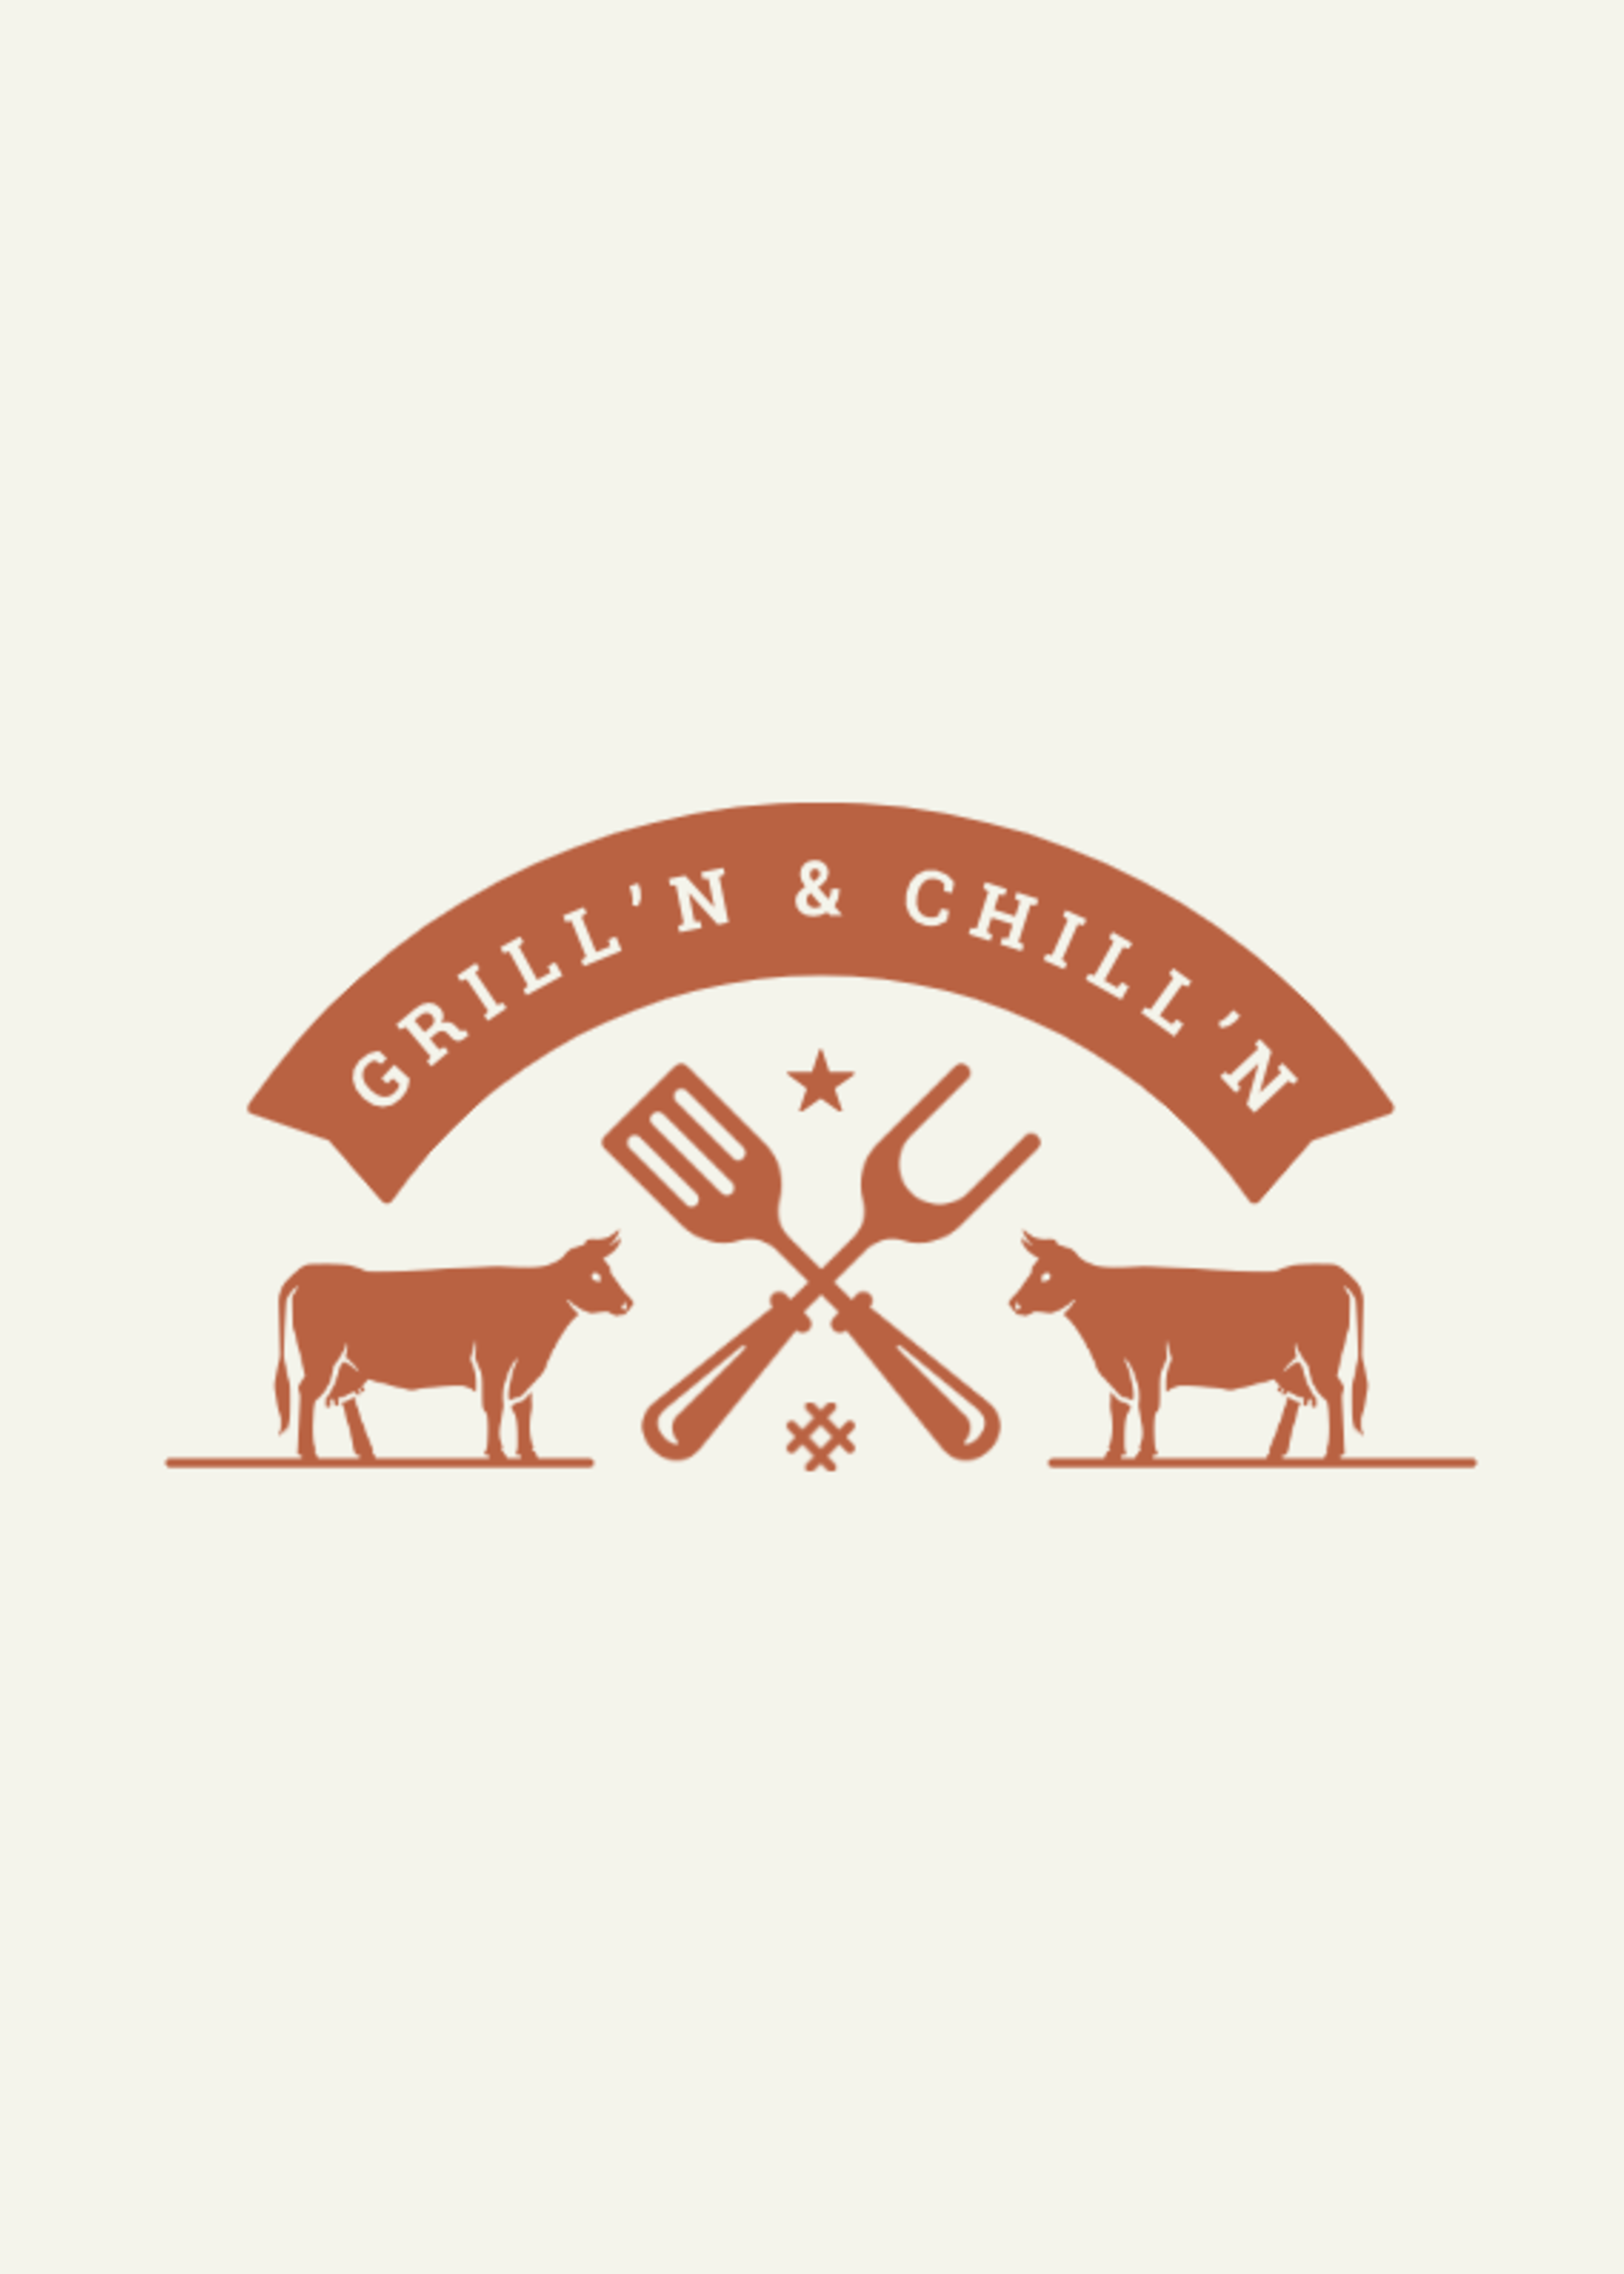 6/11/24 at 5:30 p.m. - Grill'n & Chill'n